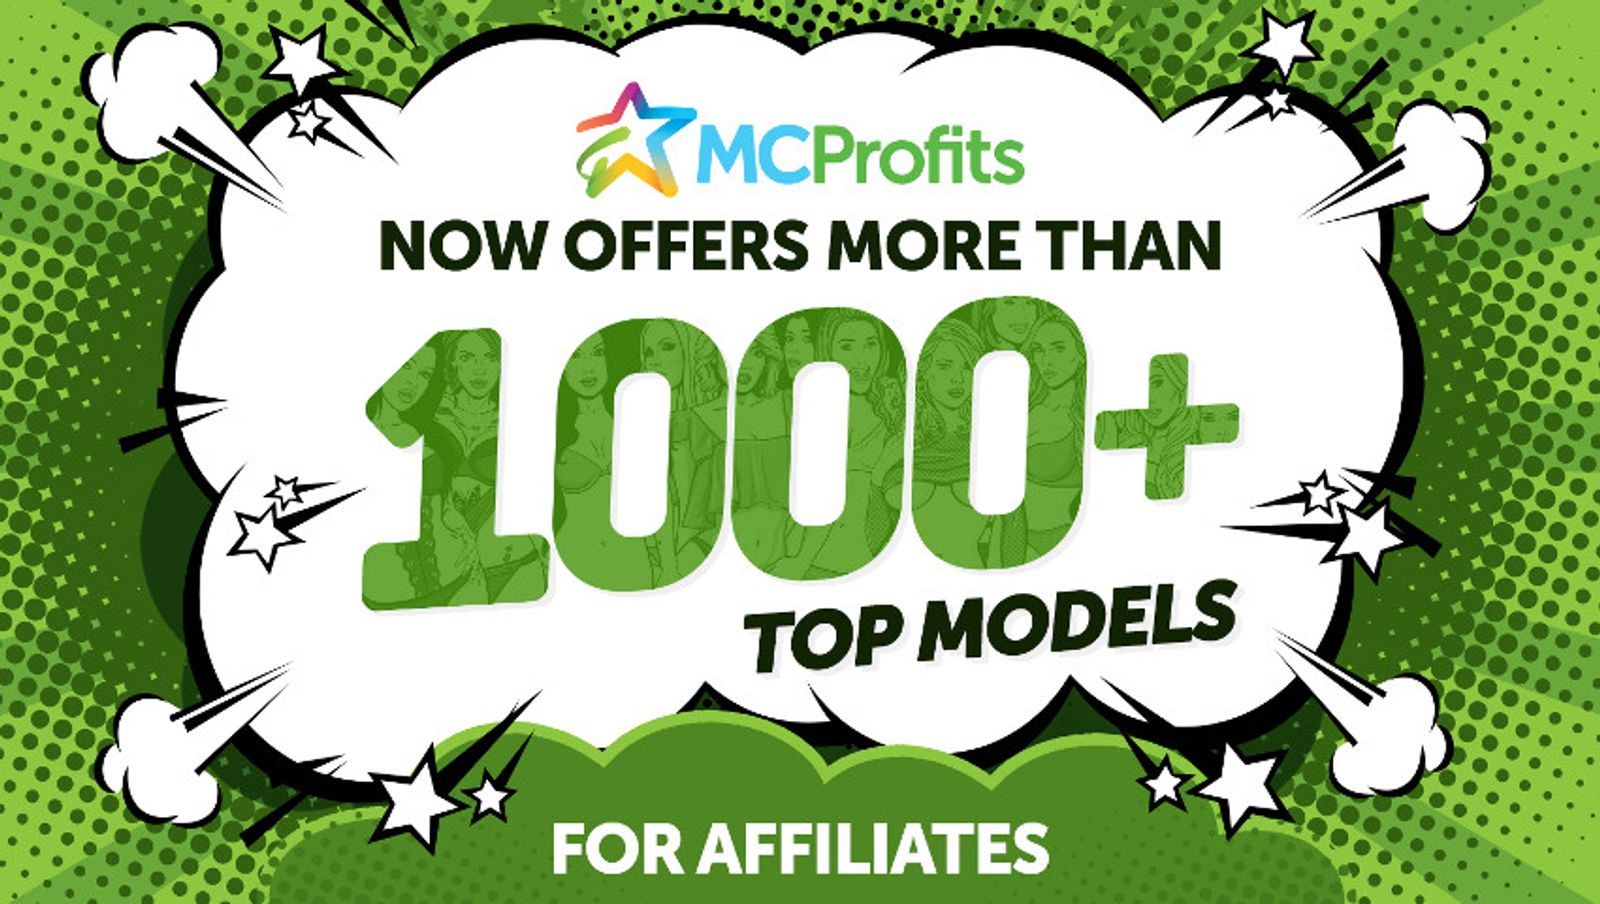 MCProfits Now Offers More Than 1,000 Models for Affiliates